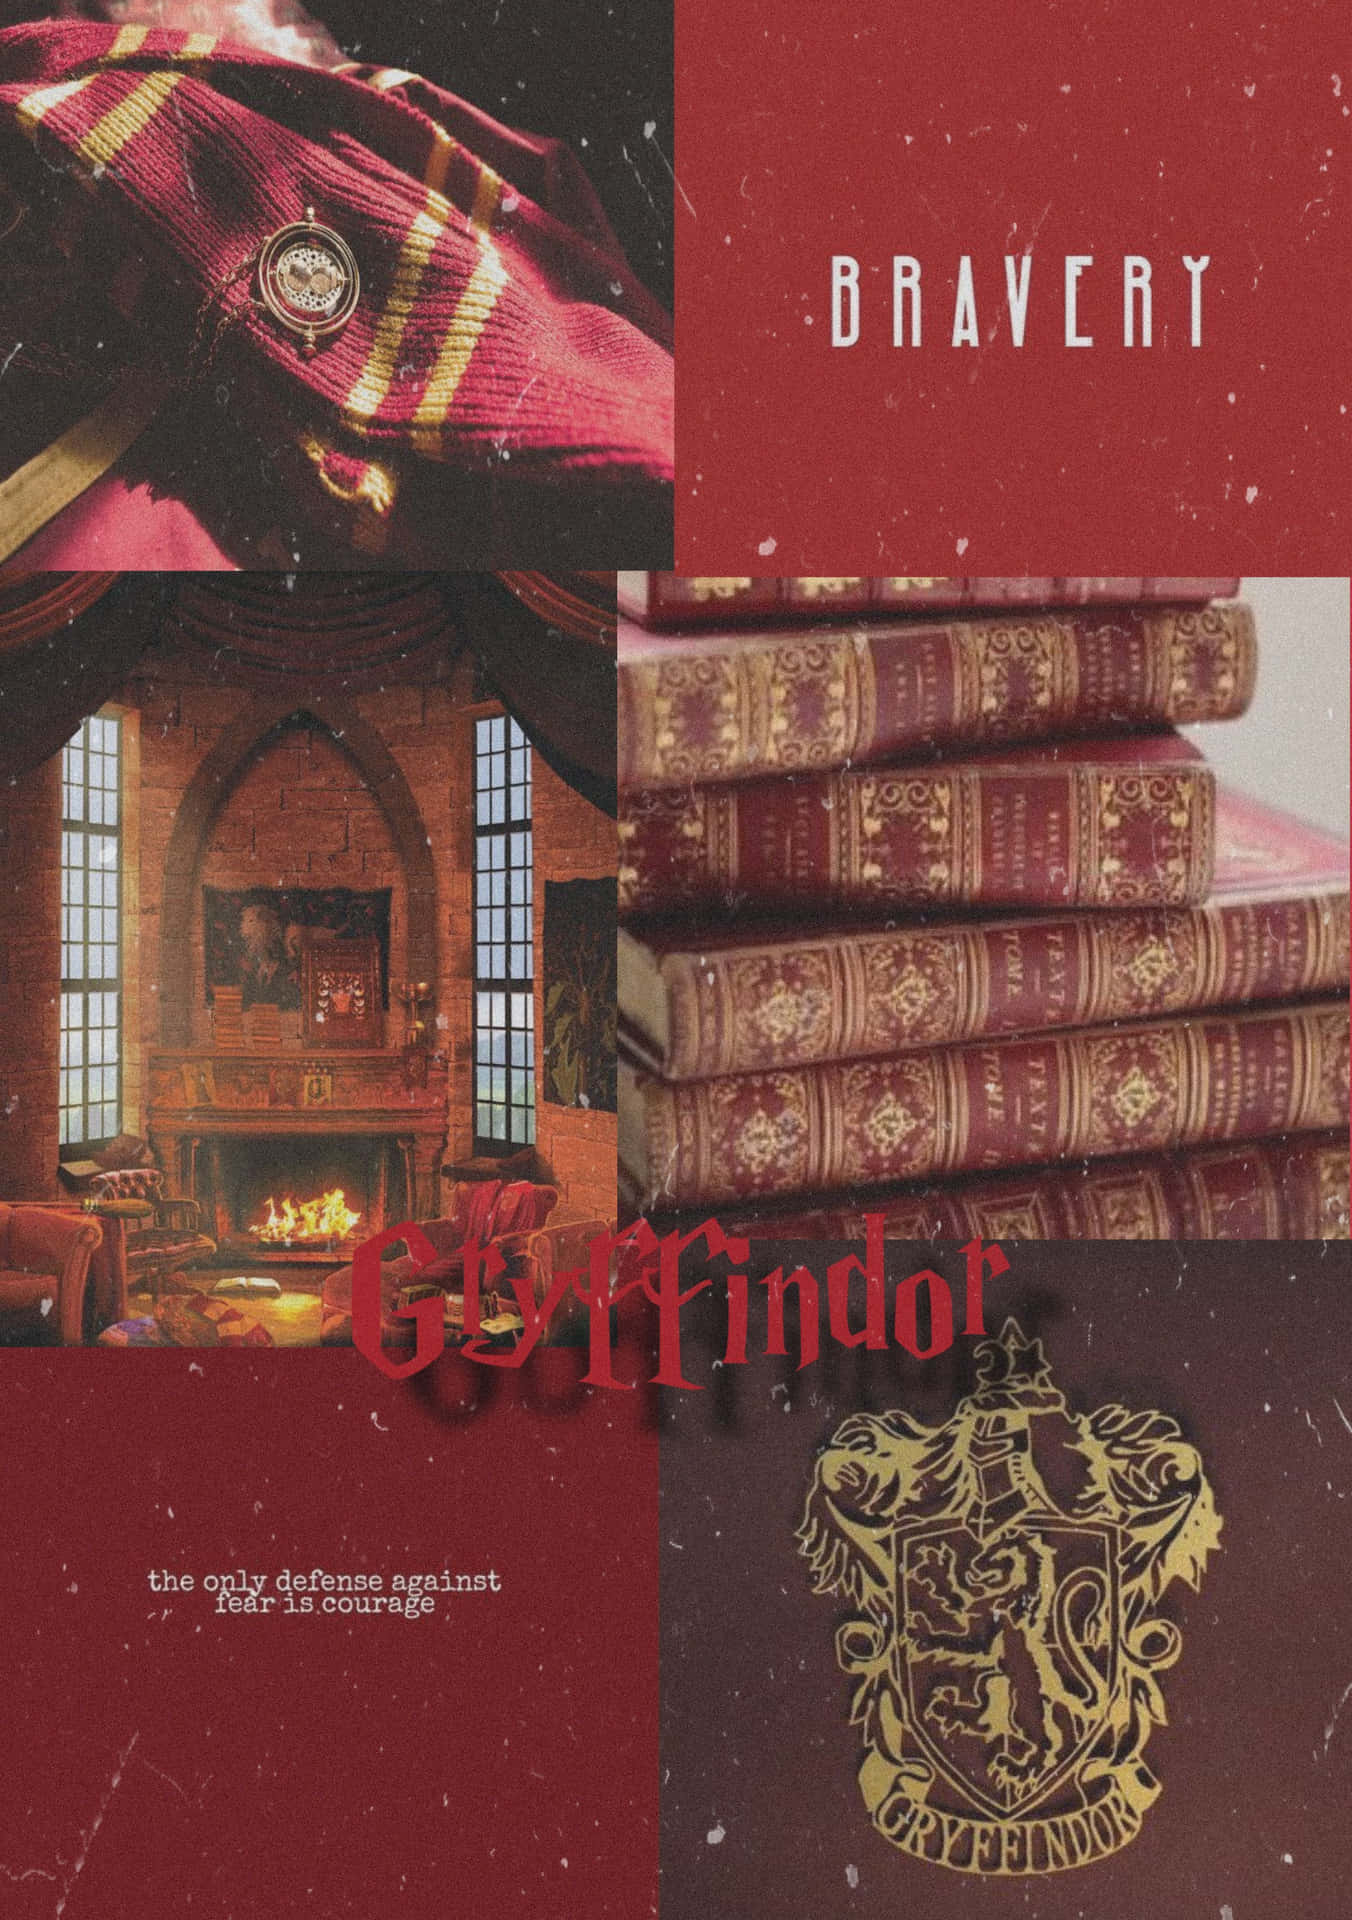 Get ready to join the Gryffindor house! Wallpaper